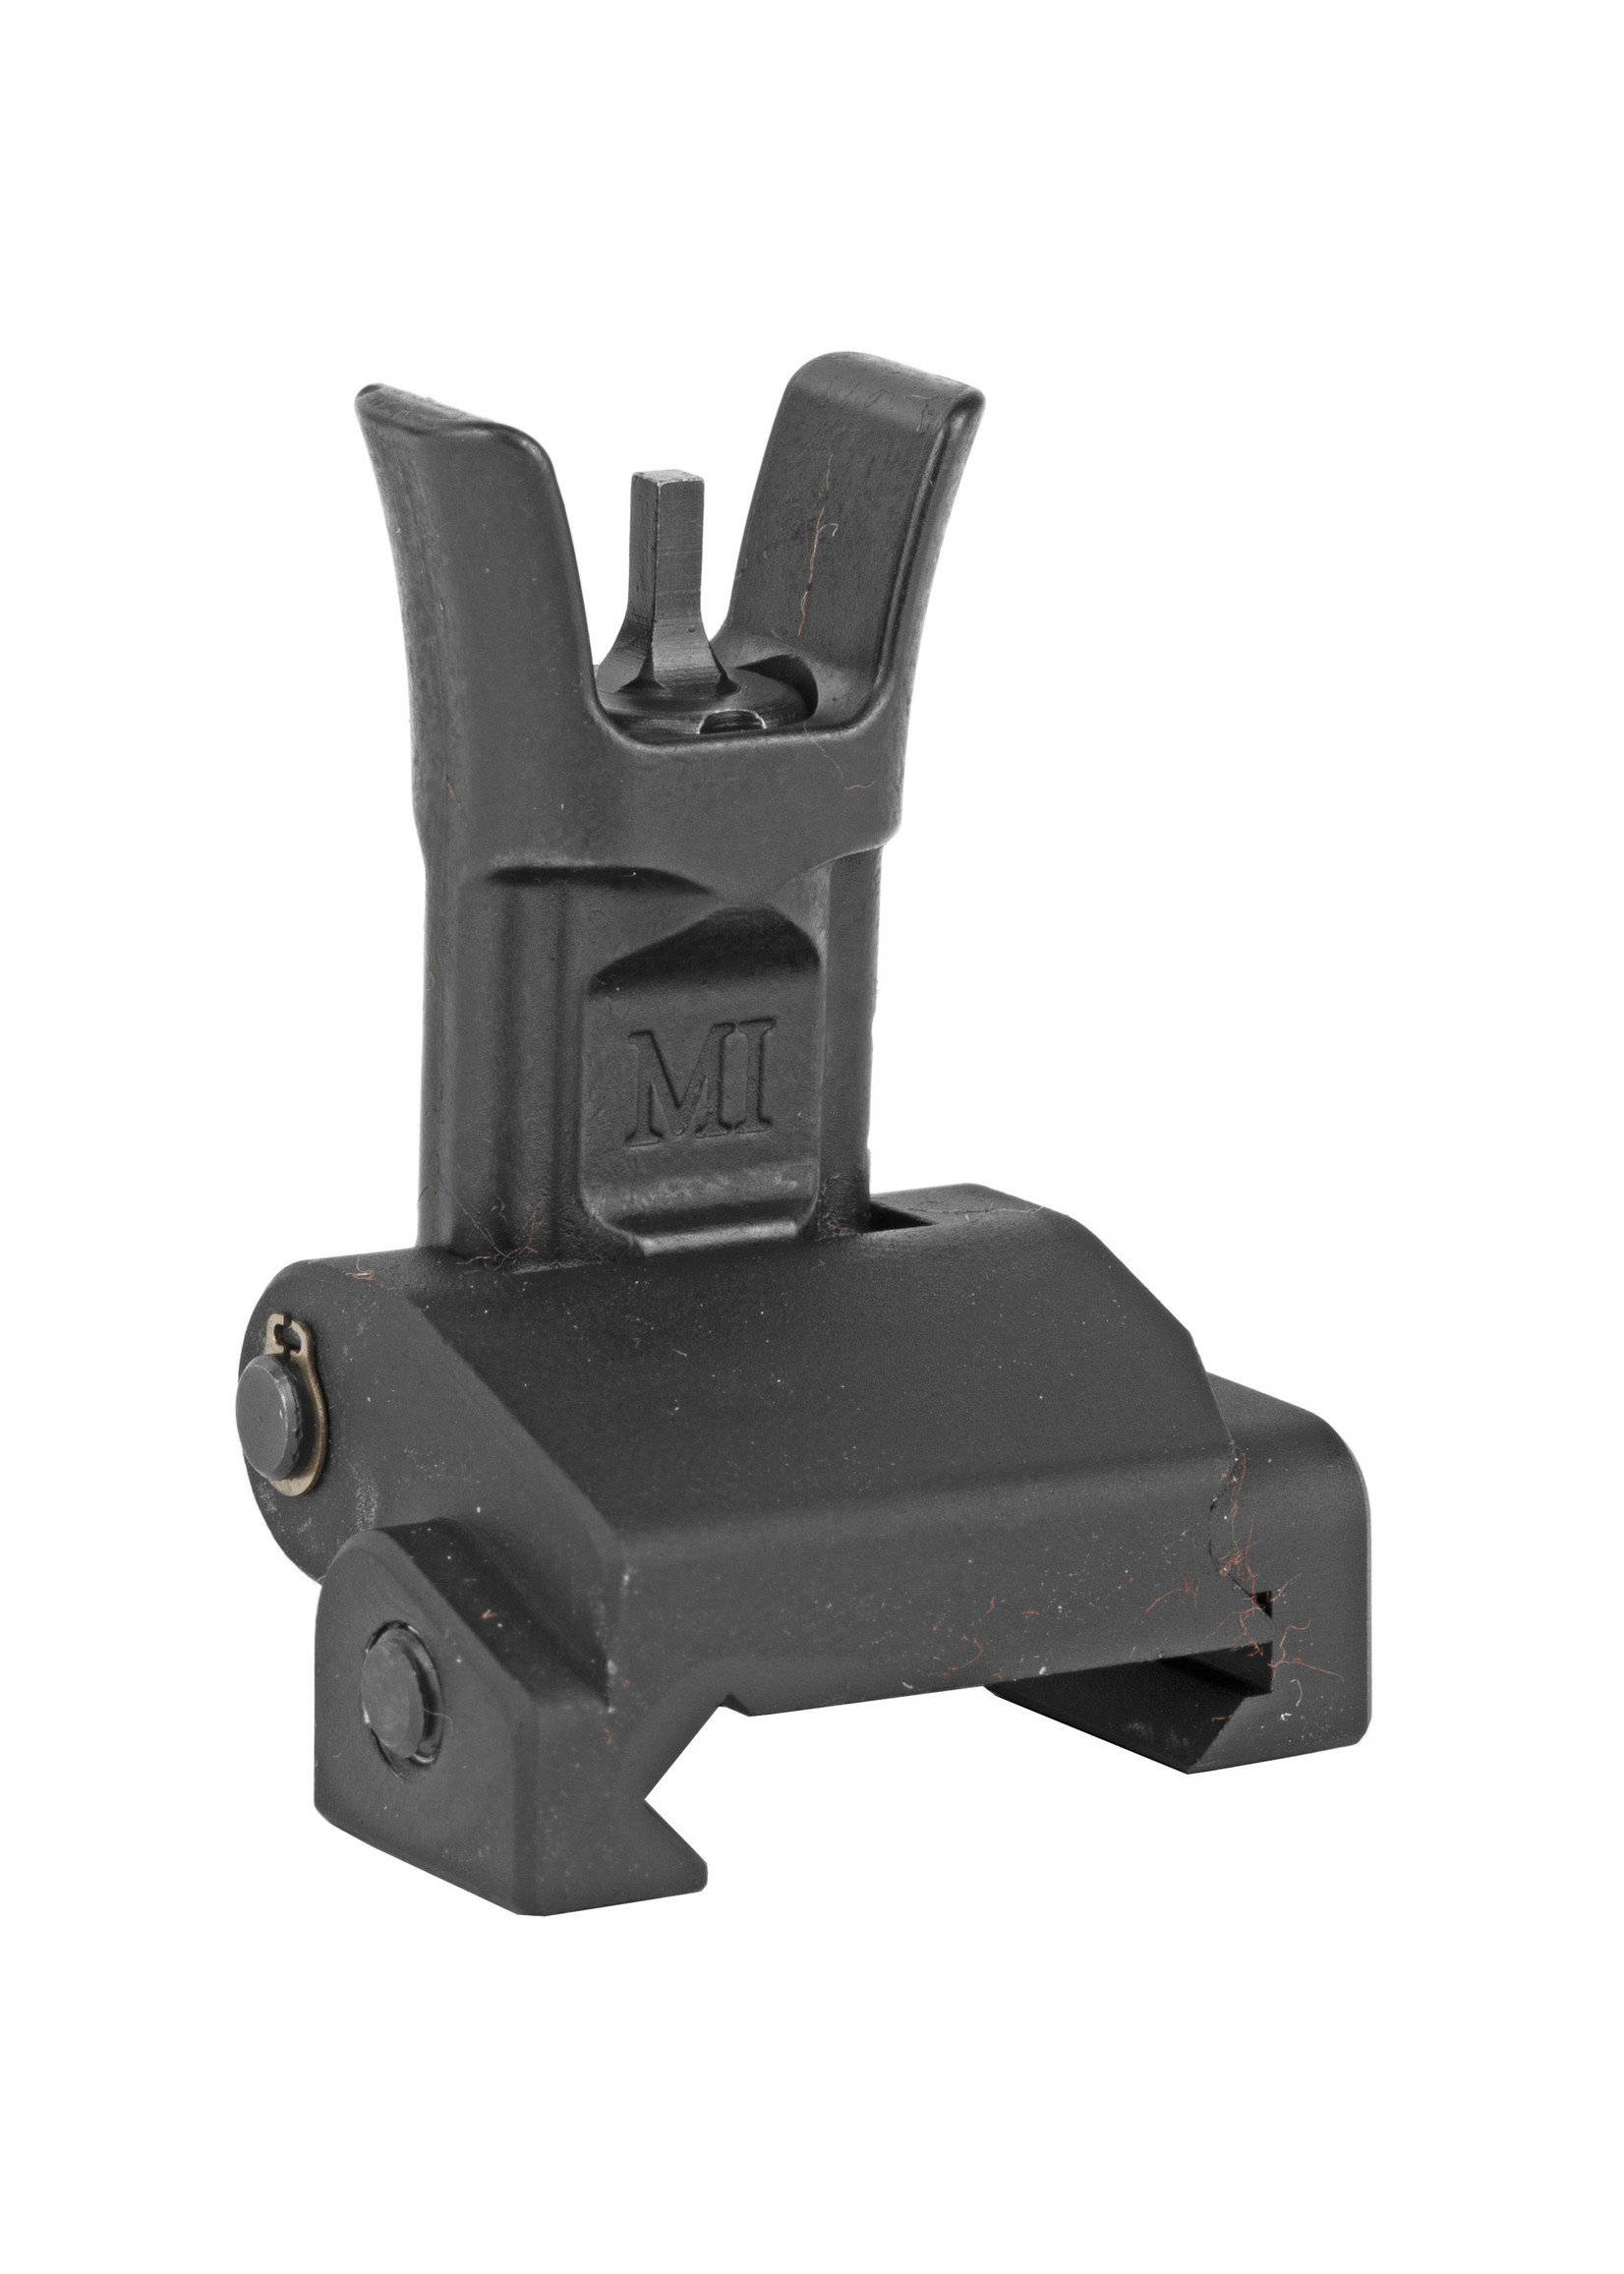 Midwest Industries Midwest Industries MICRSF Combat Rifle Front Sight AR-15, M4, M16 Black Hardcoat Anodized Flip Up Steel/Aluminum